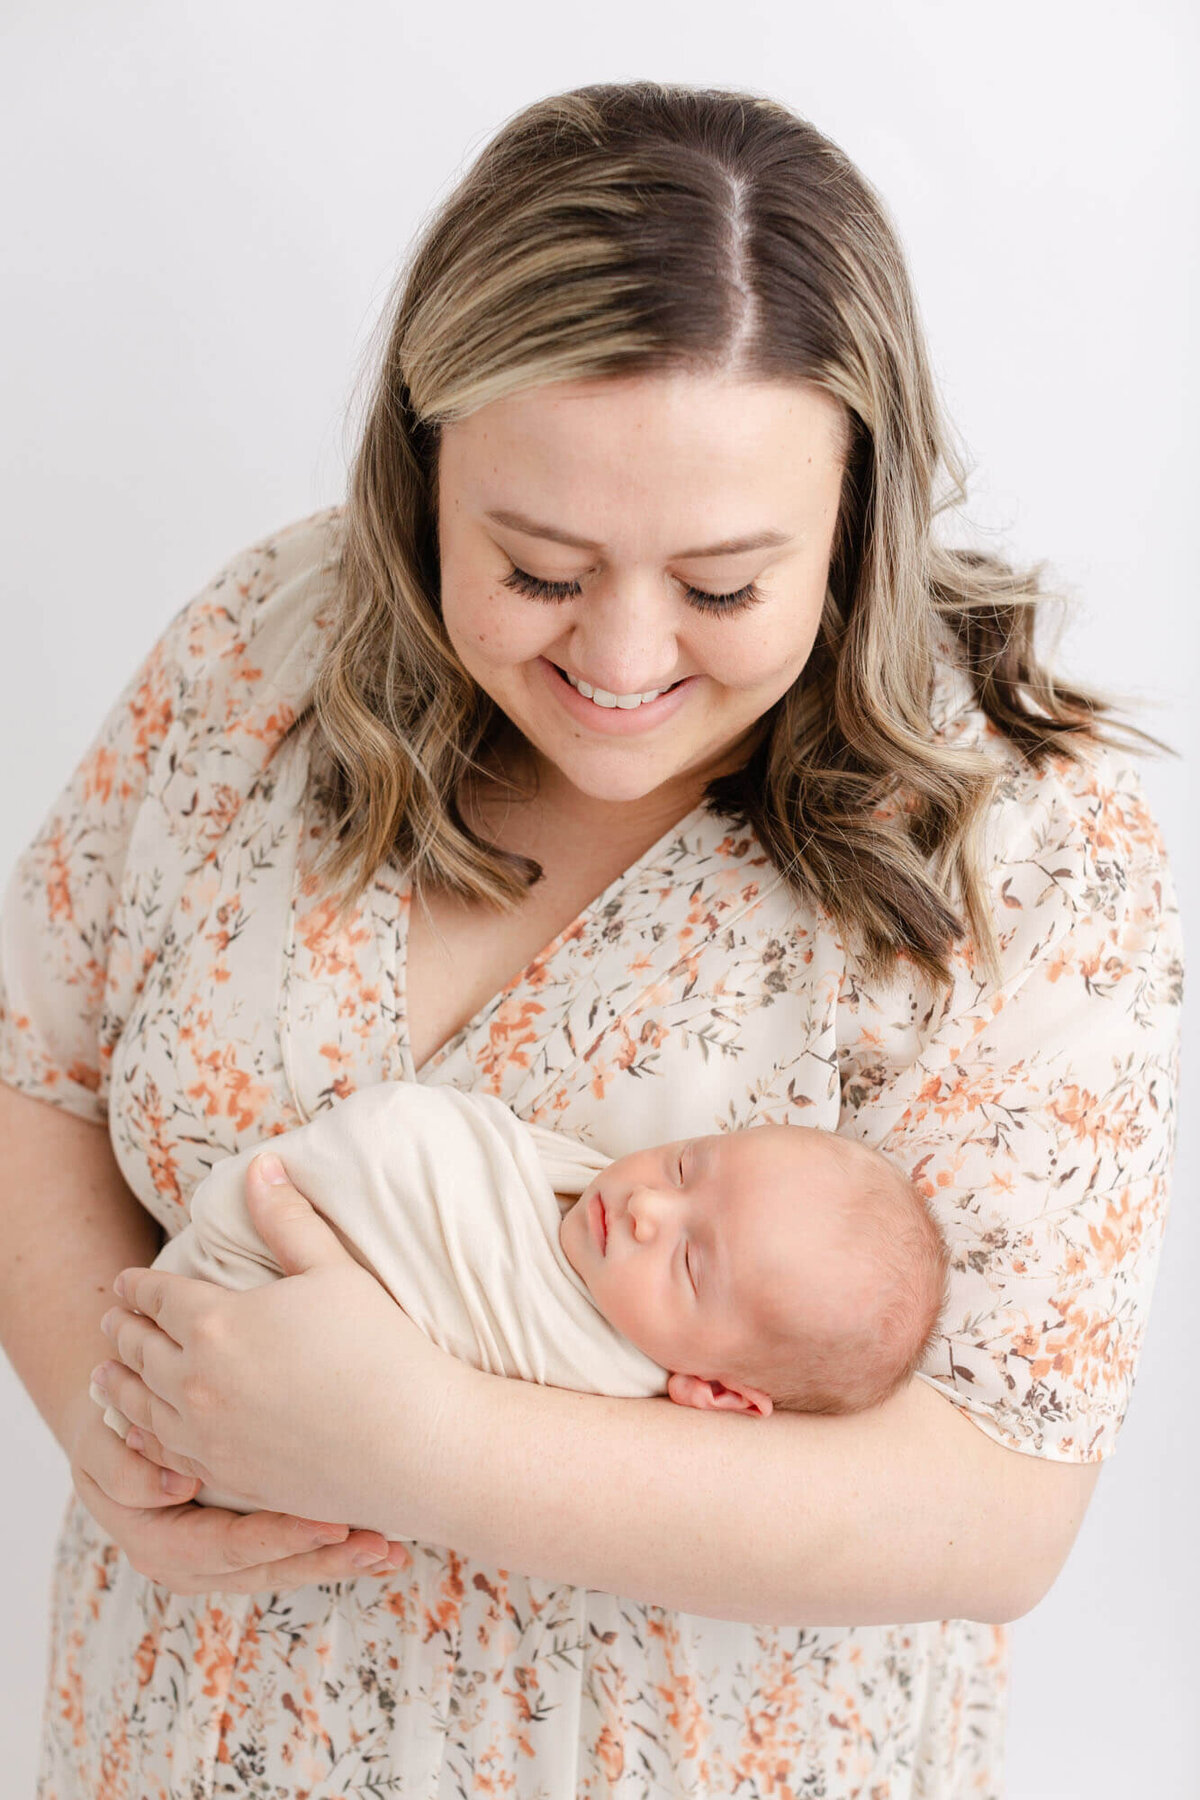 Woman with blonde hair and wearing a beige dress with rust colored flowers, she has professional hair and makeup done. She is smiling down at her newborn baby whom she is holding in her arms. Baby is sleeping peacefully in Mama's arms.